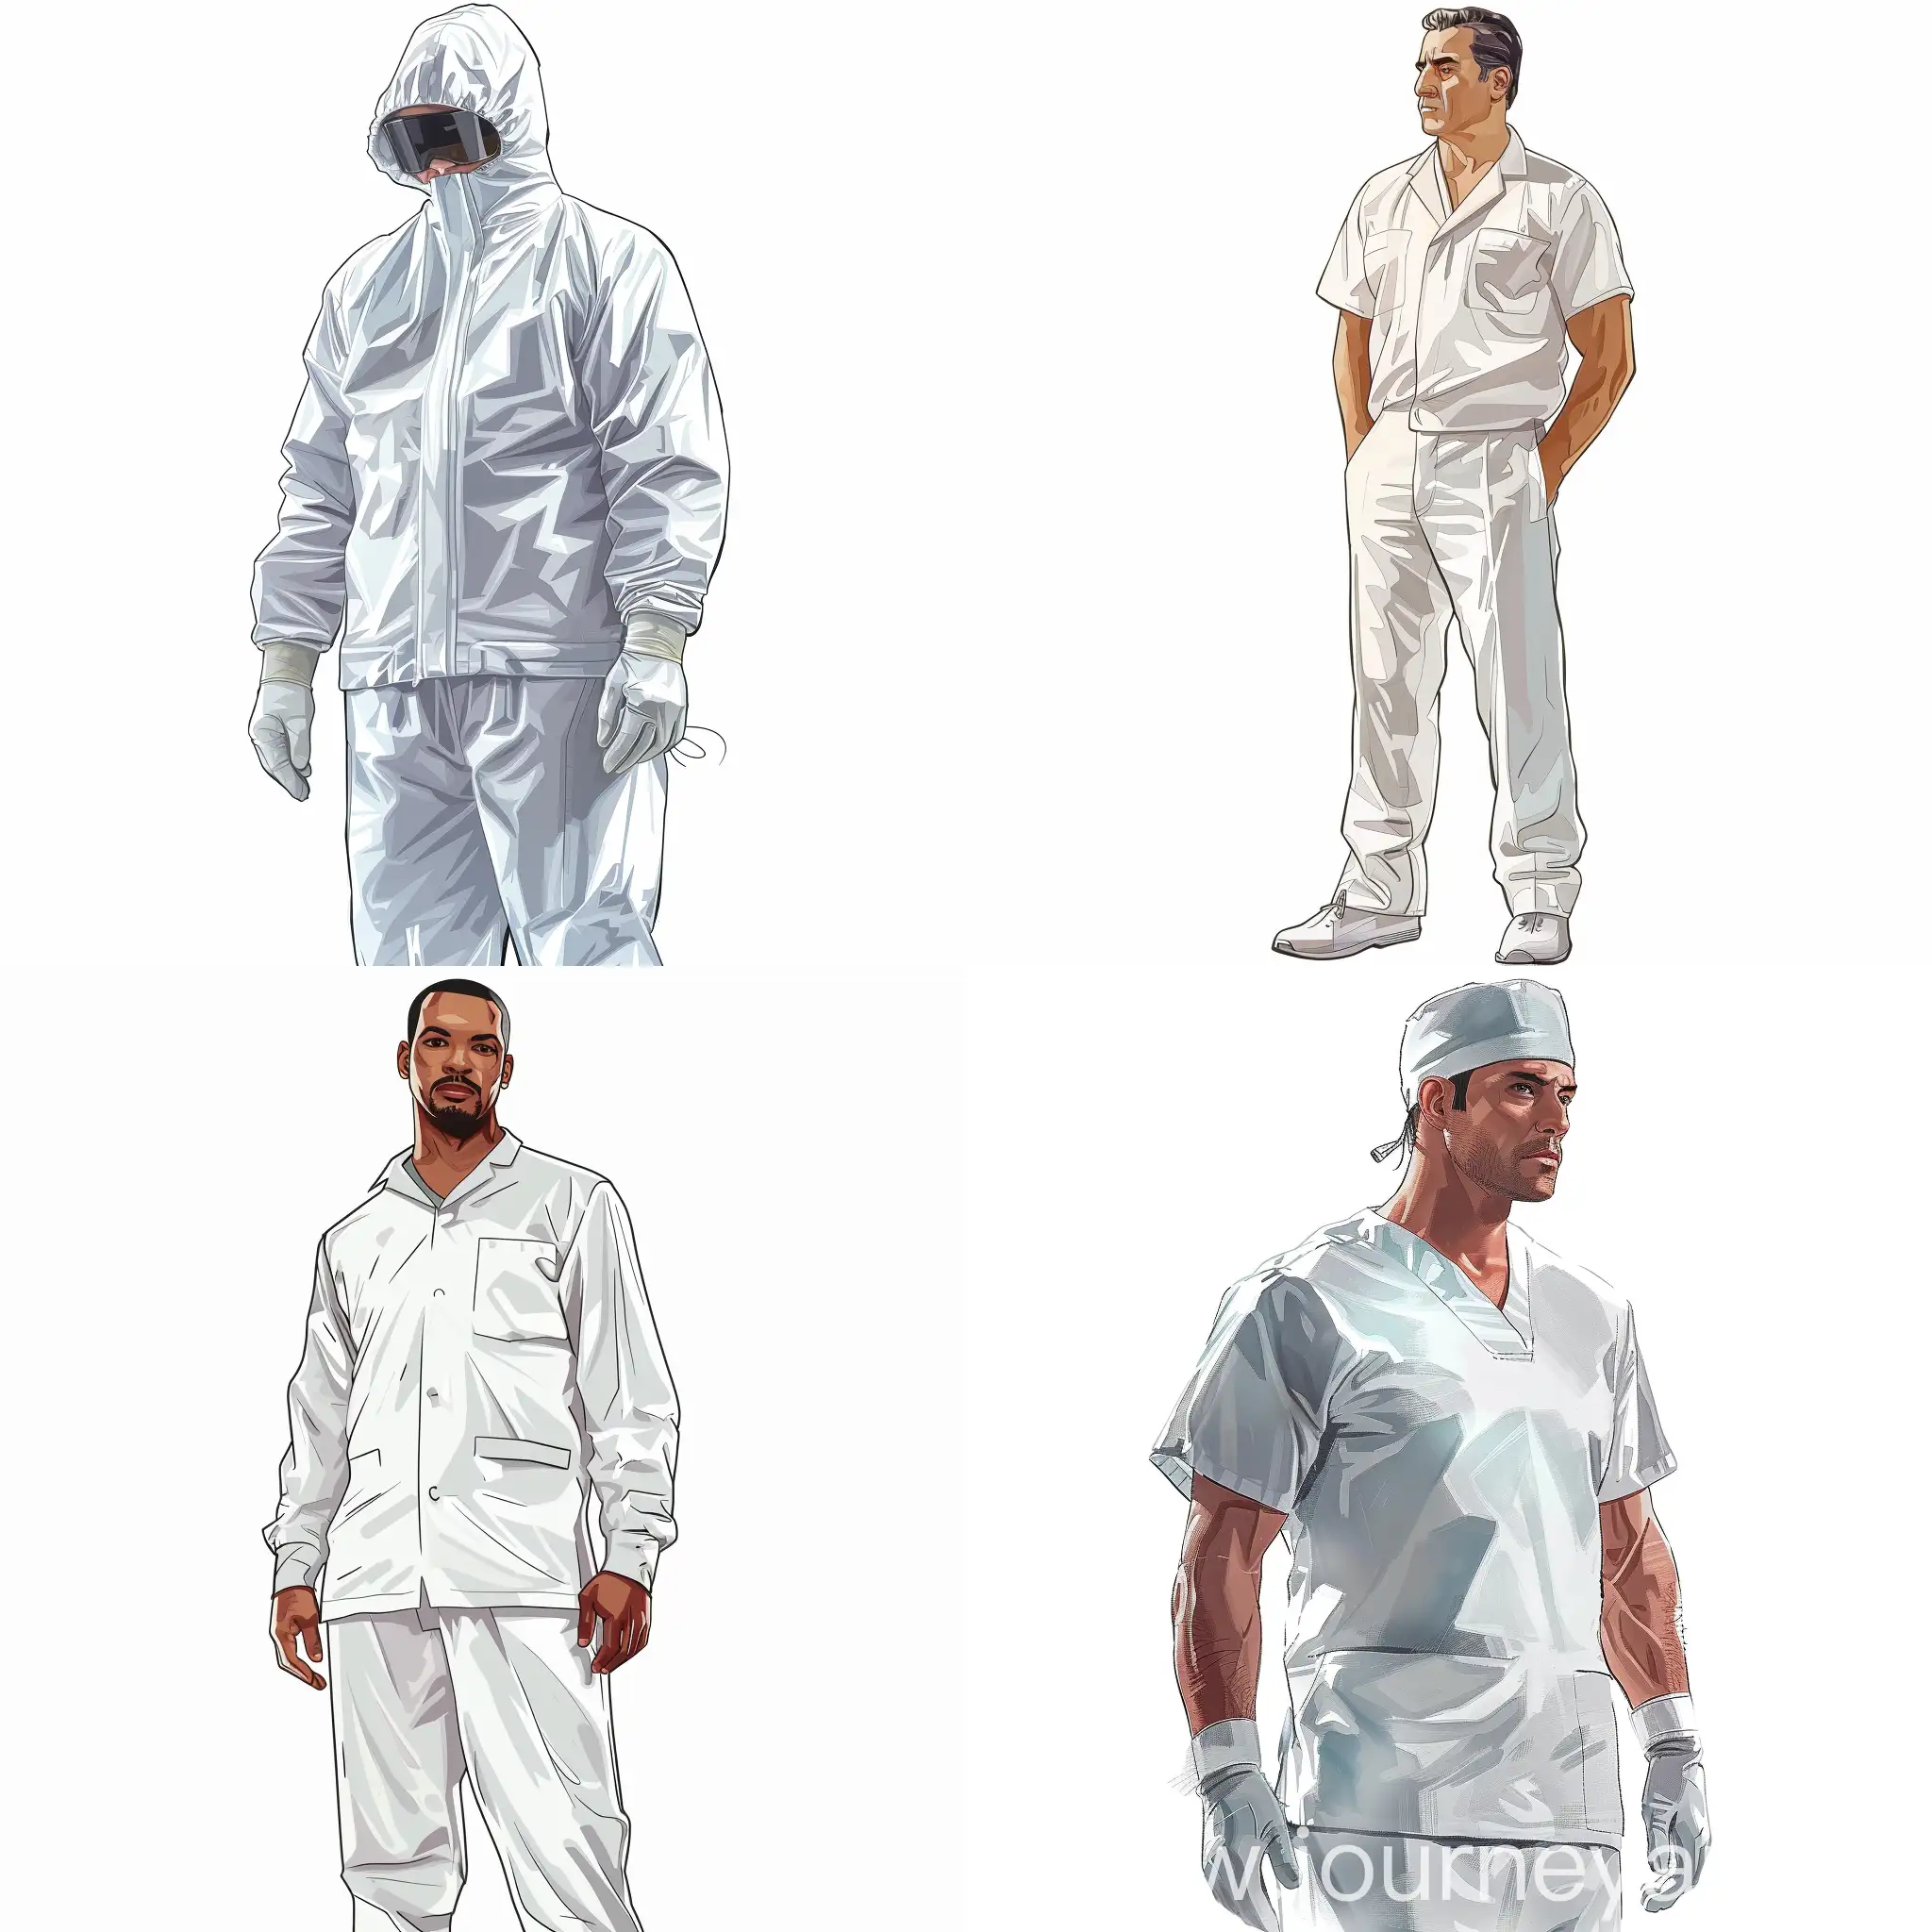 Draw a full-length surgeon in a white uniform. A drawing in the style of the GTA 5 computer game. The background is white.